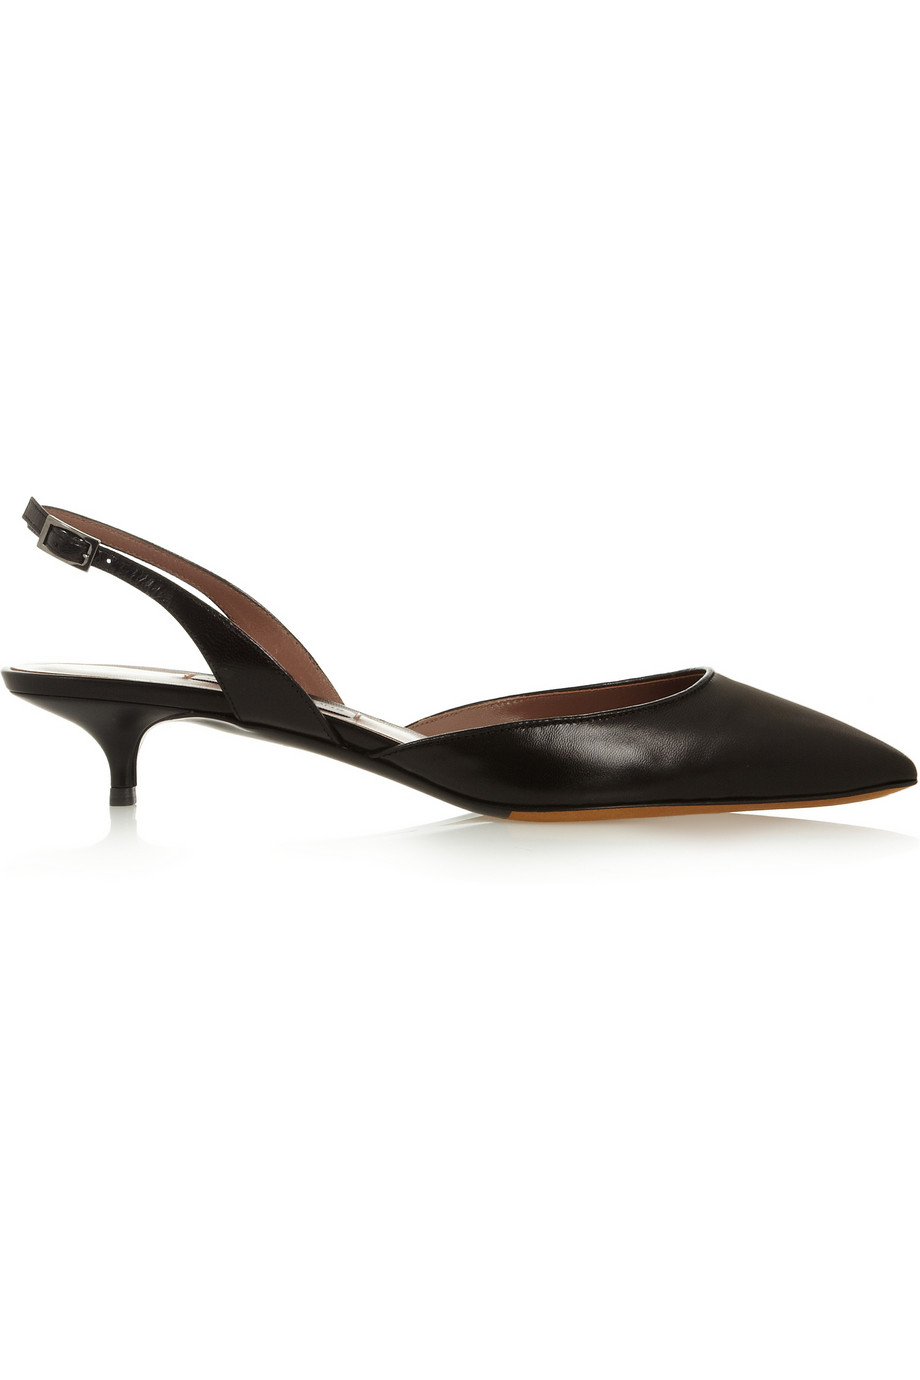 Tabitha simmons Lily Leather Slingback Pumps in Black | Lyst